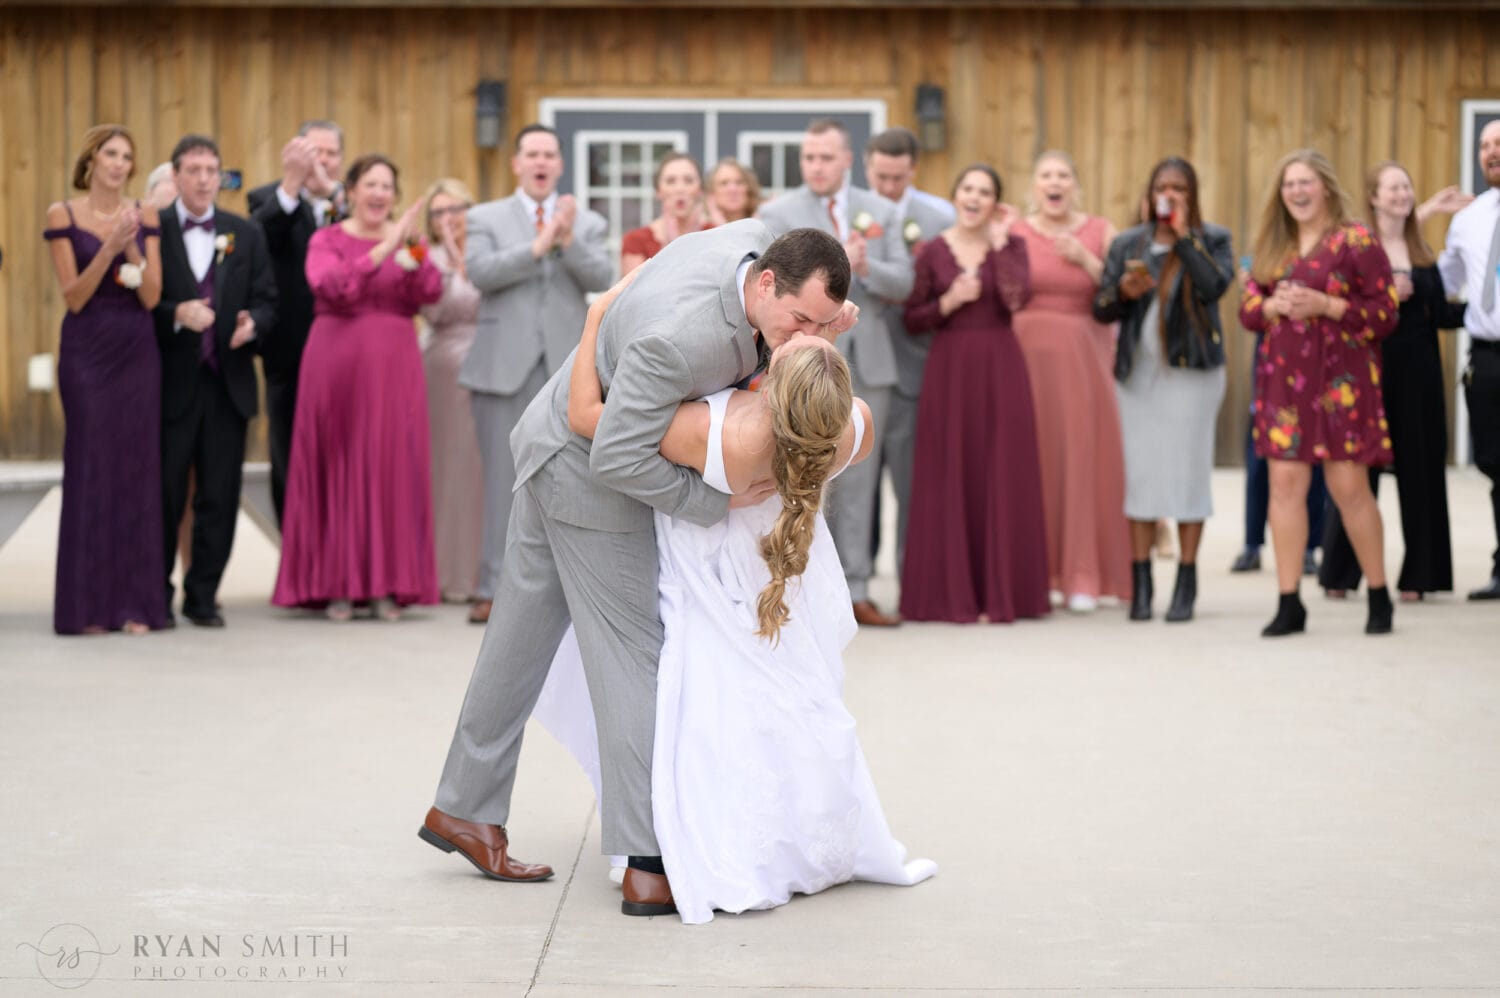 First dance with the bride and groom and family standing in the background - The Blessed Barn